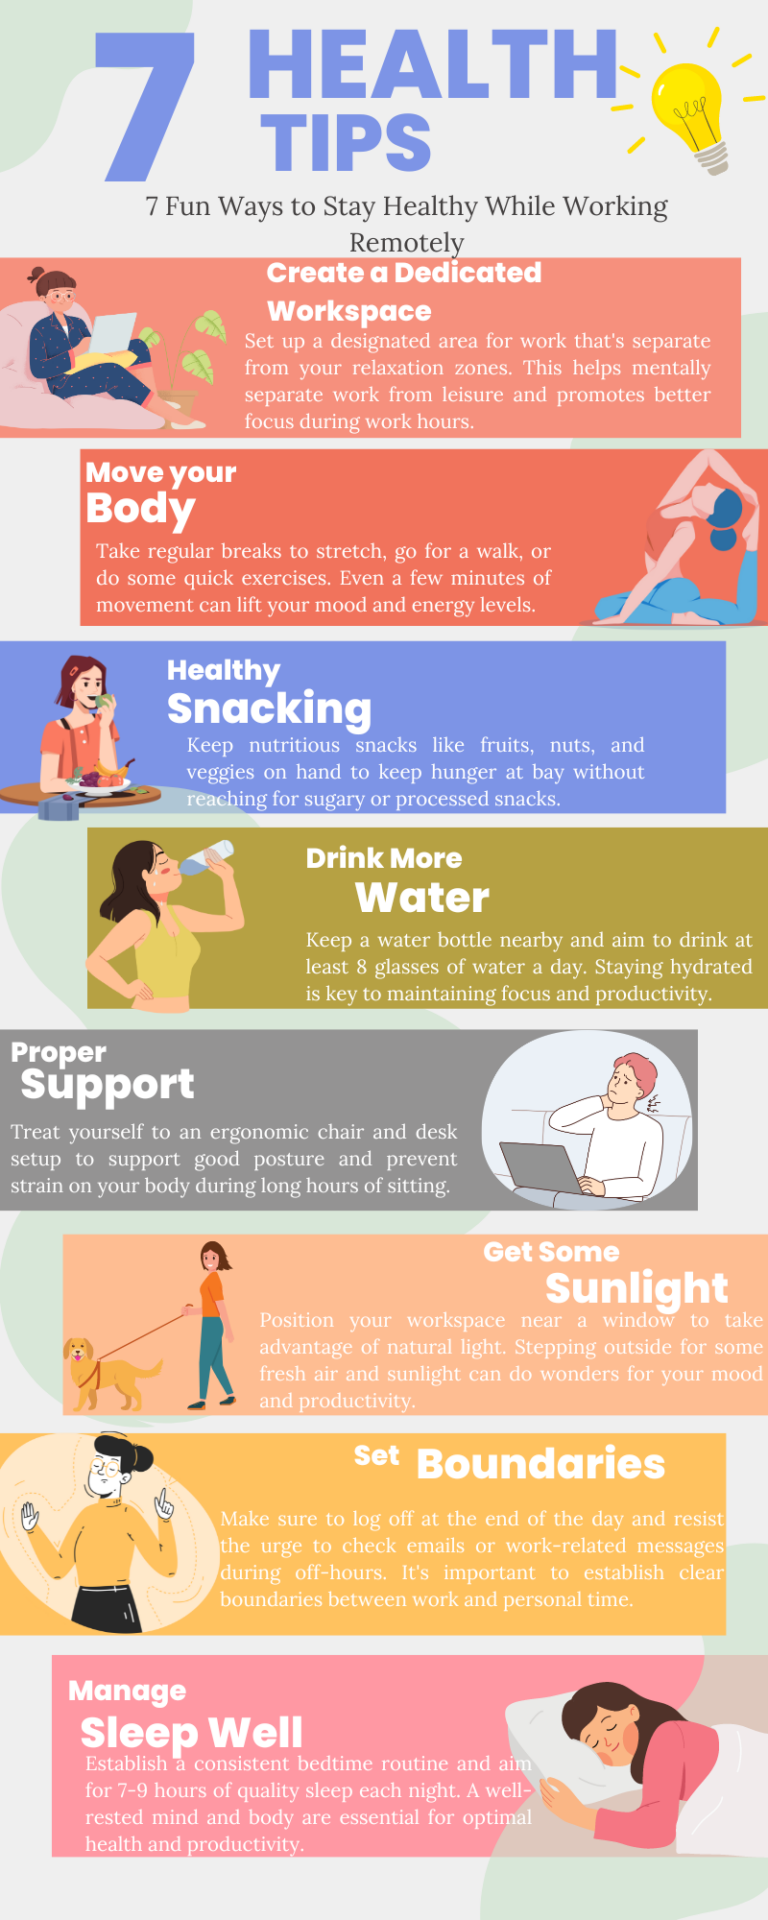 Fun Ways to Stay Healthy While Working Remotely